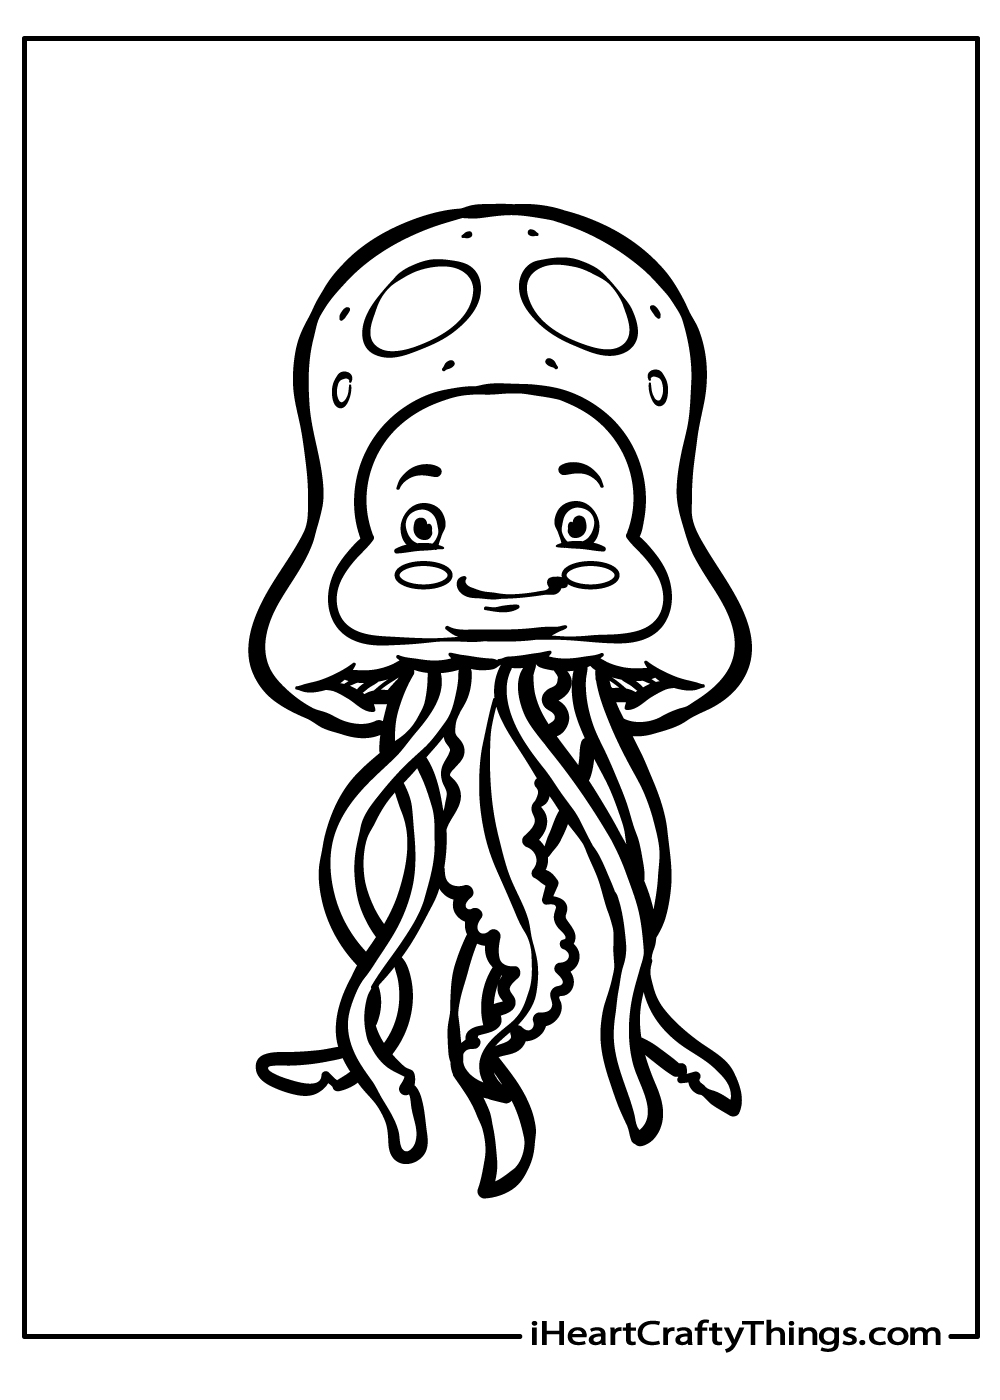 Jellyfish Coloring Sheets for Kids